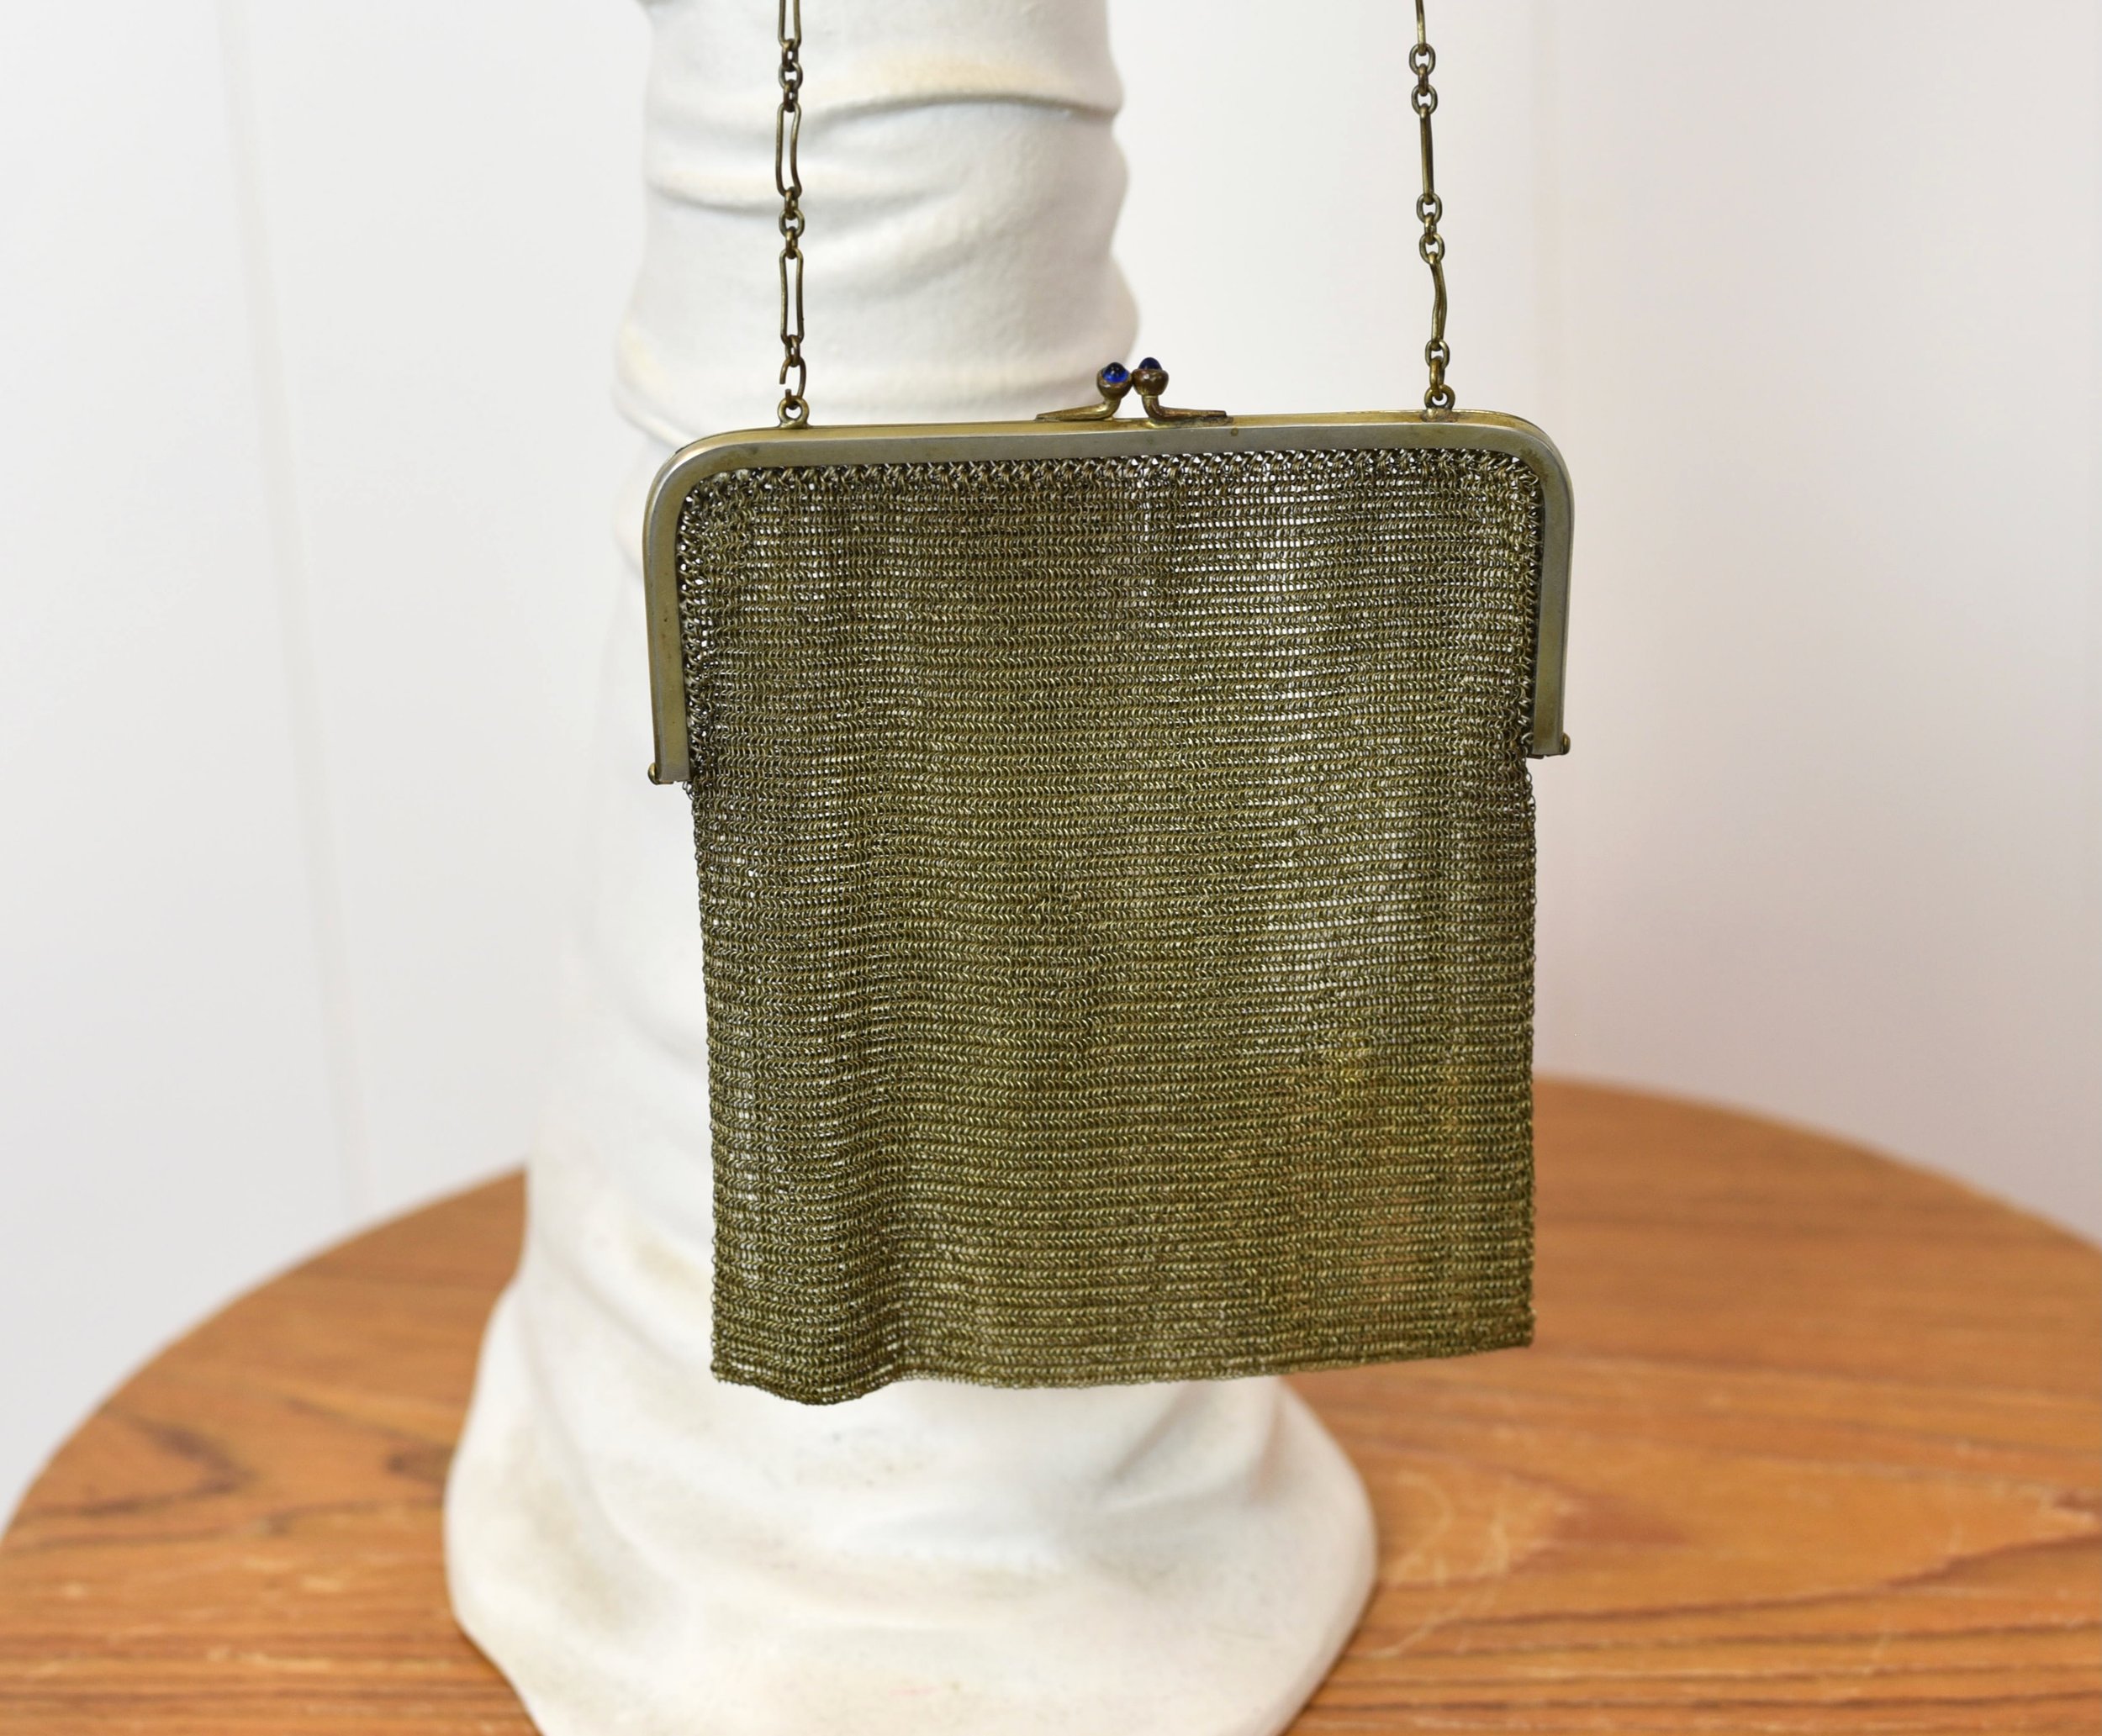 1920s Bliss Soldered Metal Chain Mesh Gold Toned Small Flapper Purse Handbag  — Canned Ham Vintage